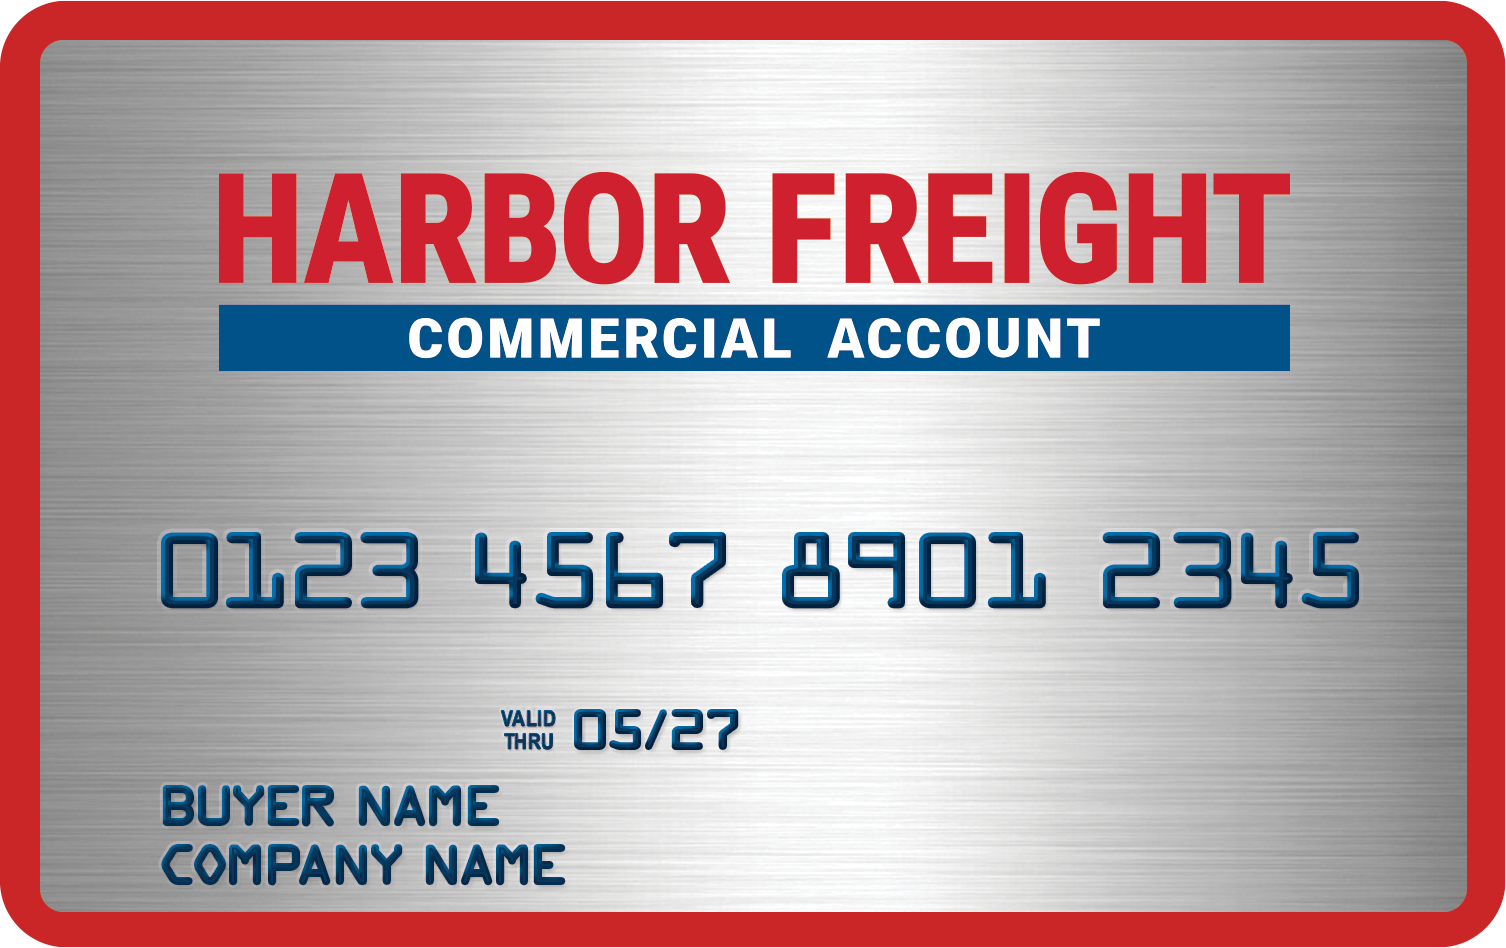 The Card That Works Hard - Harbor Freight Credit Card - Apply In-Store or Online